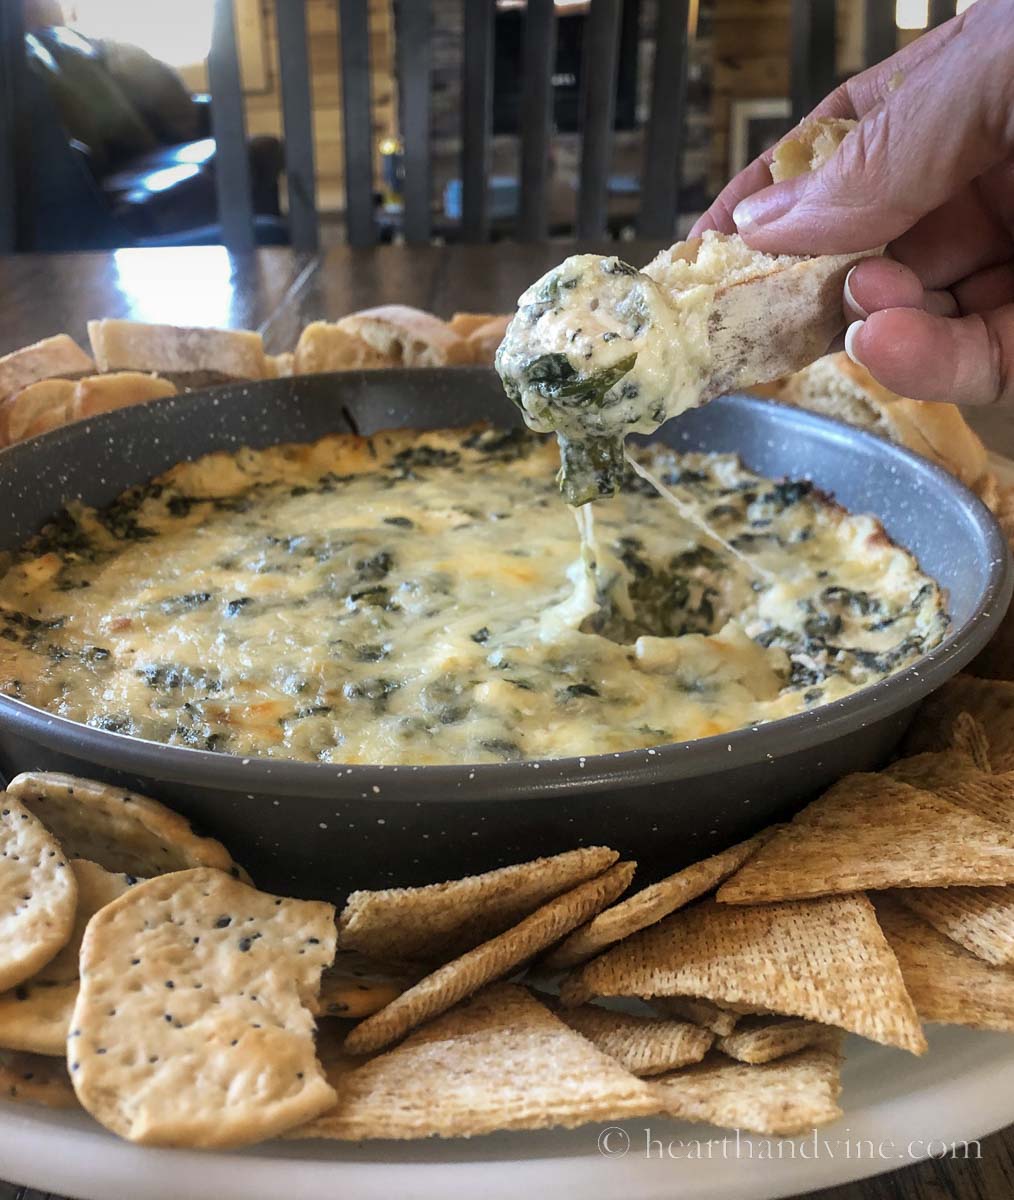 Spinach dip with cream cheese in a baking pan surrounded by cracker and bread with a hand scooping up a bit.